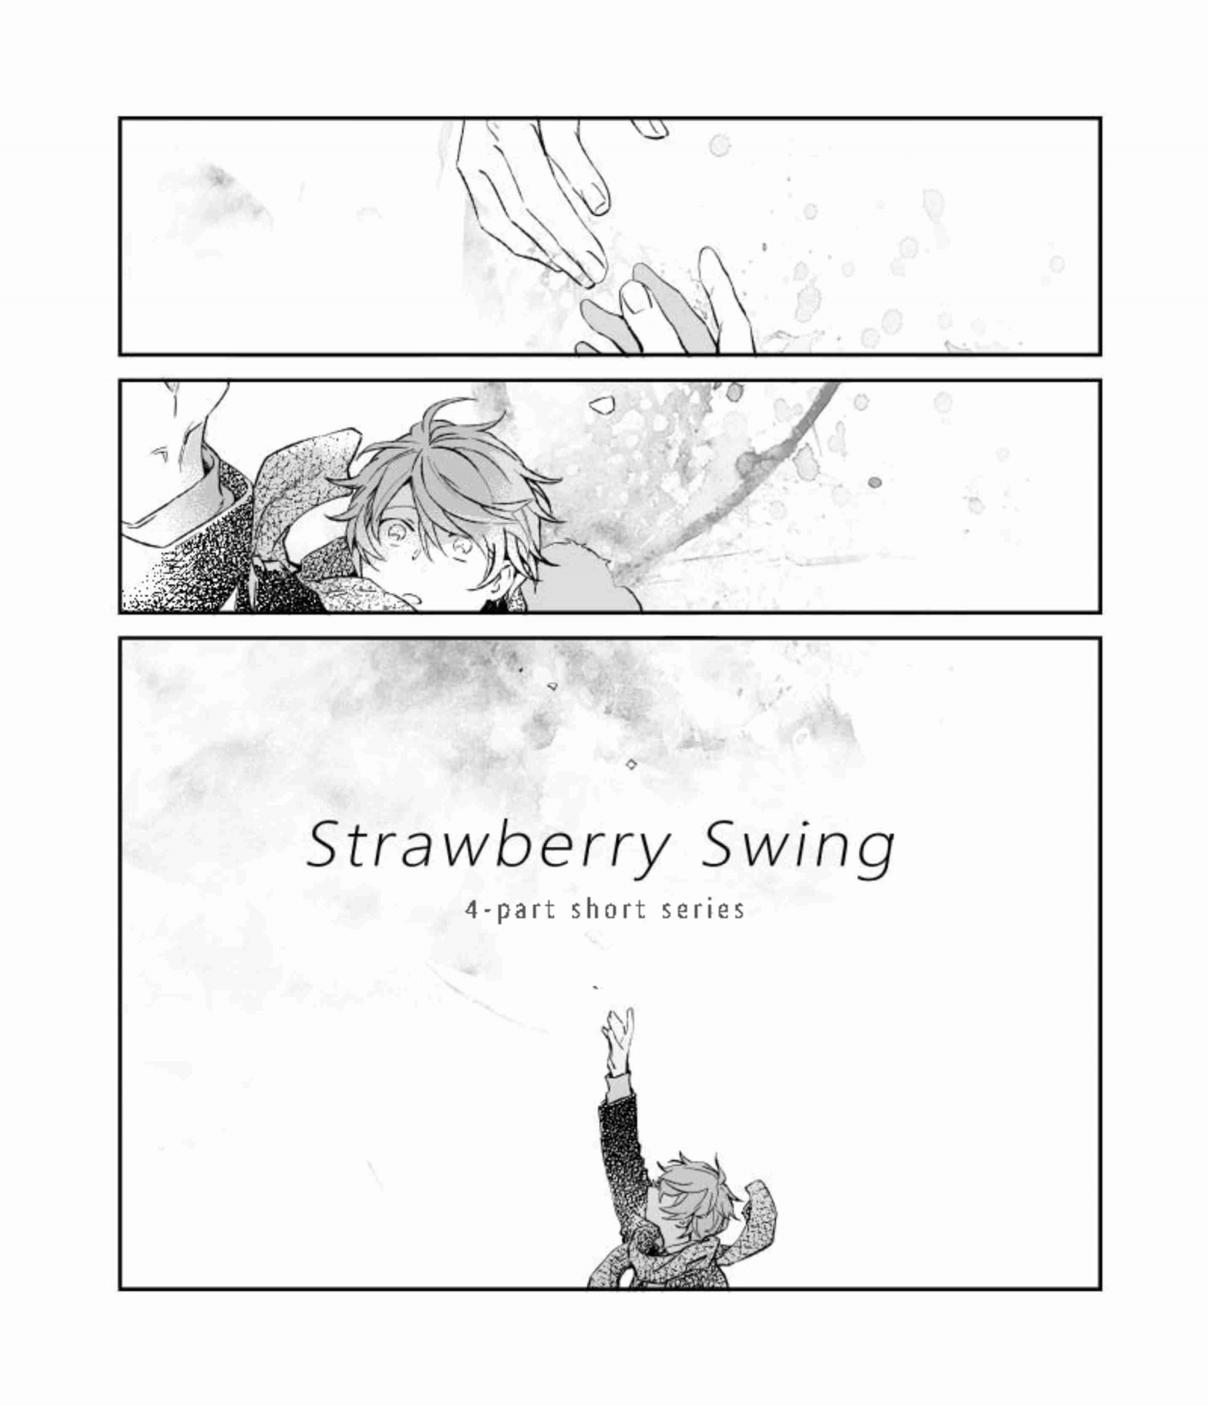 Given Ch. 33.9 Strawberry Swing Pt 3&4